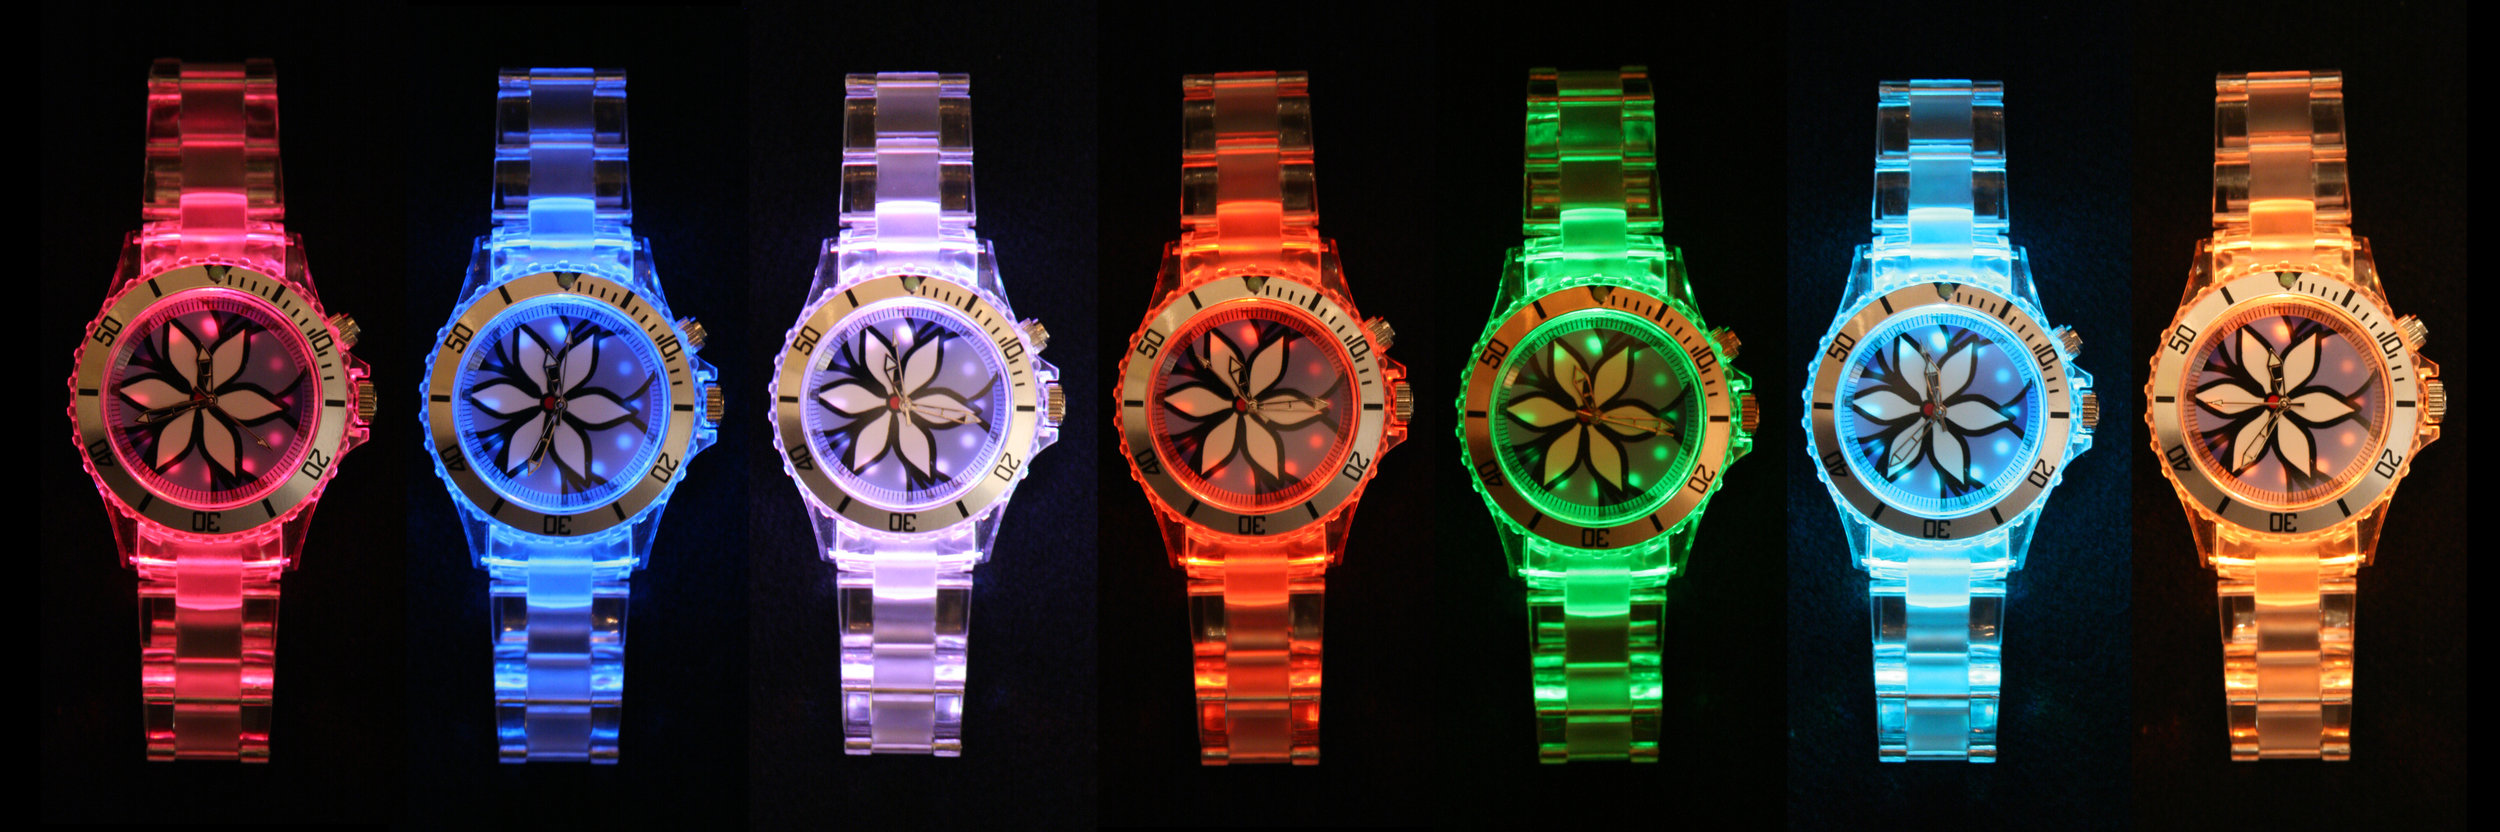 Back Lit Floral Watches, 2007